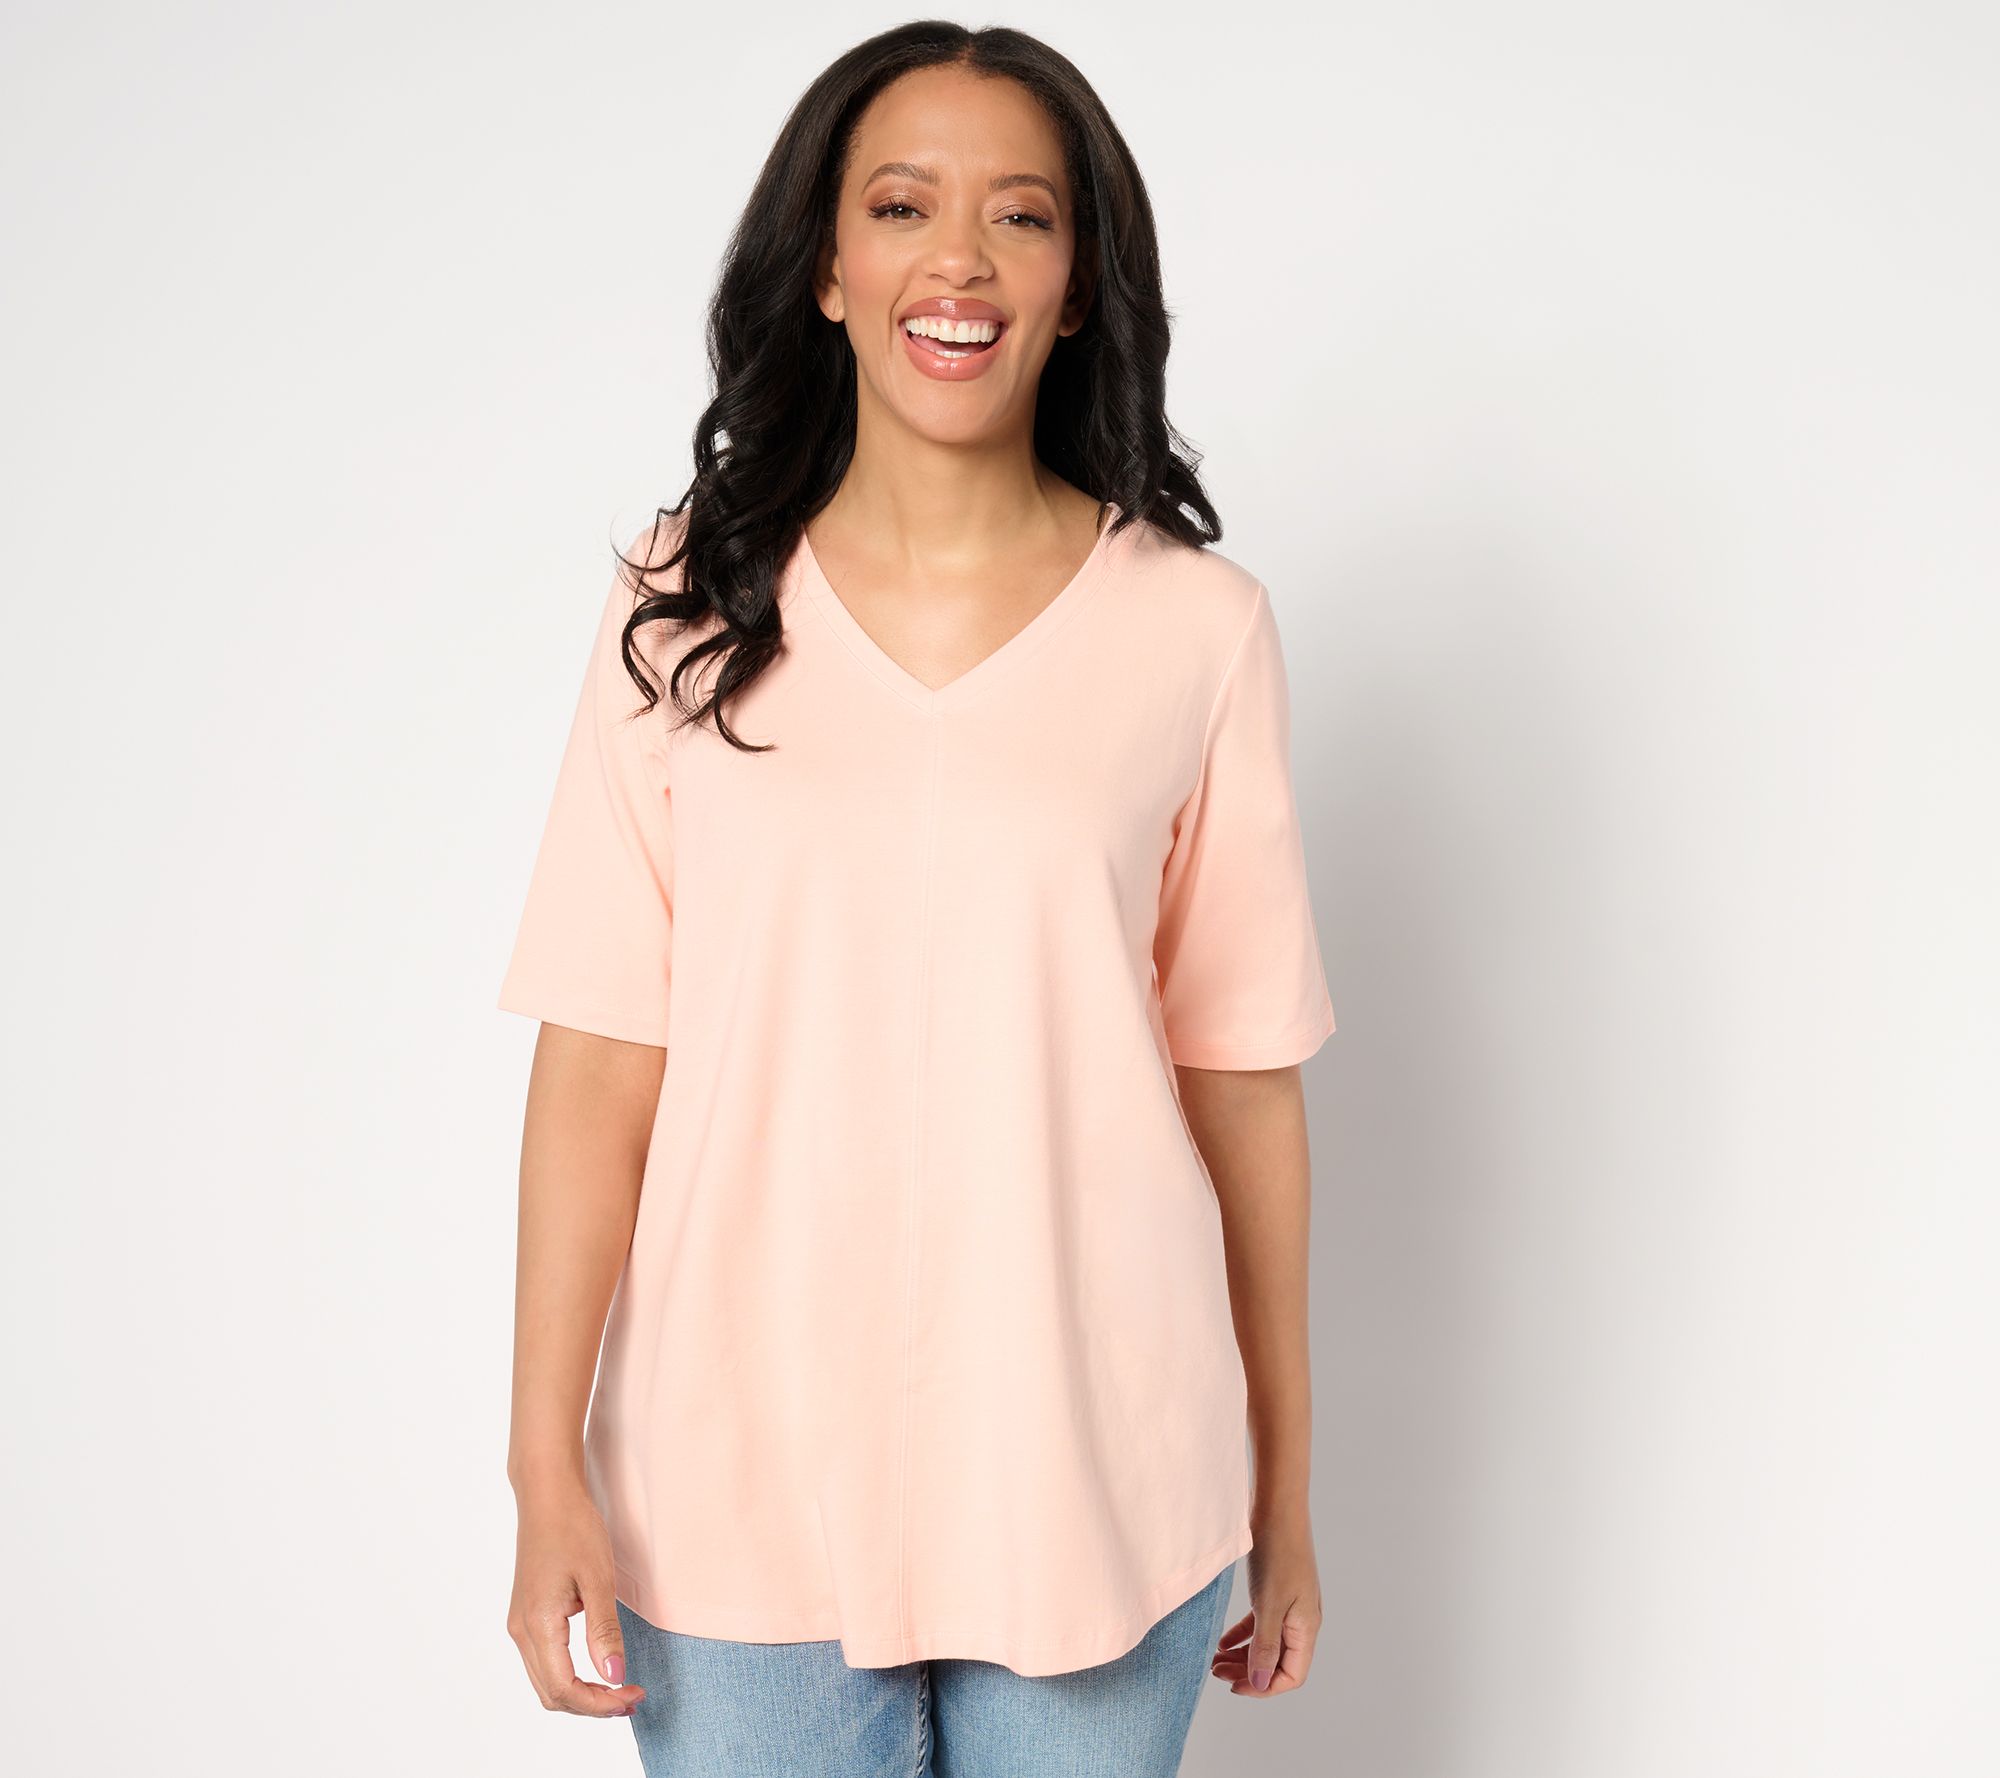 Denim & Co. Essentials Elbow Sleeve Top with Seaming Detail - QVC.com